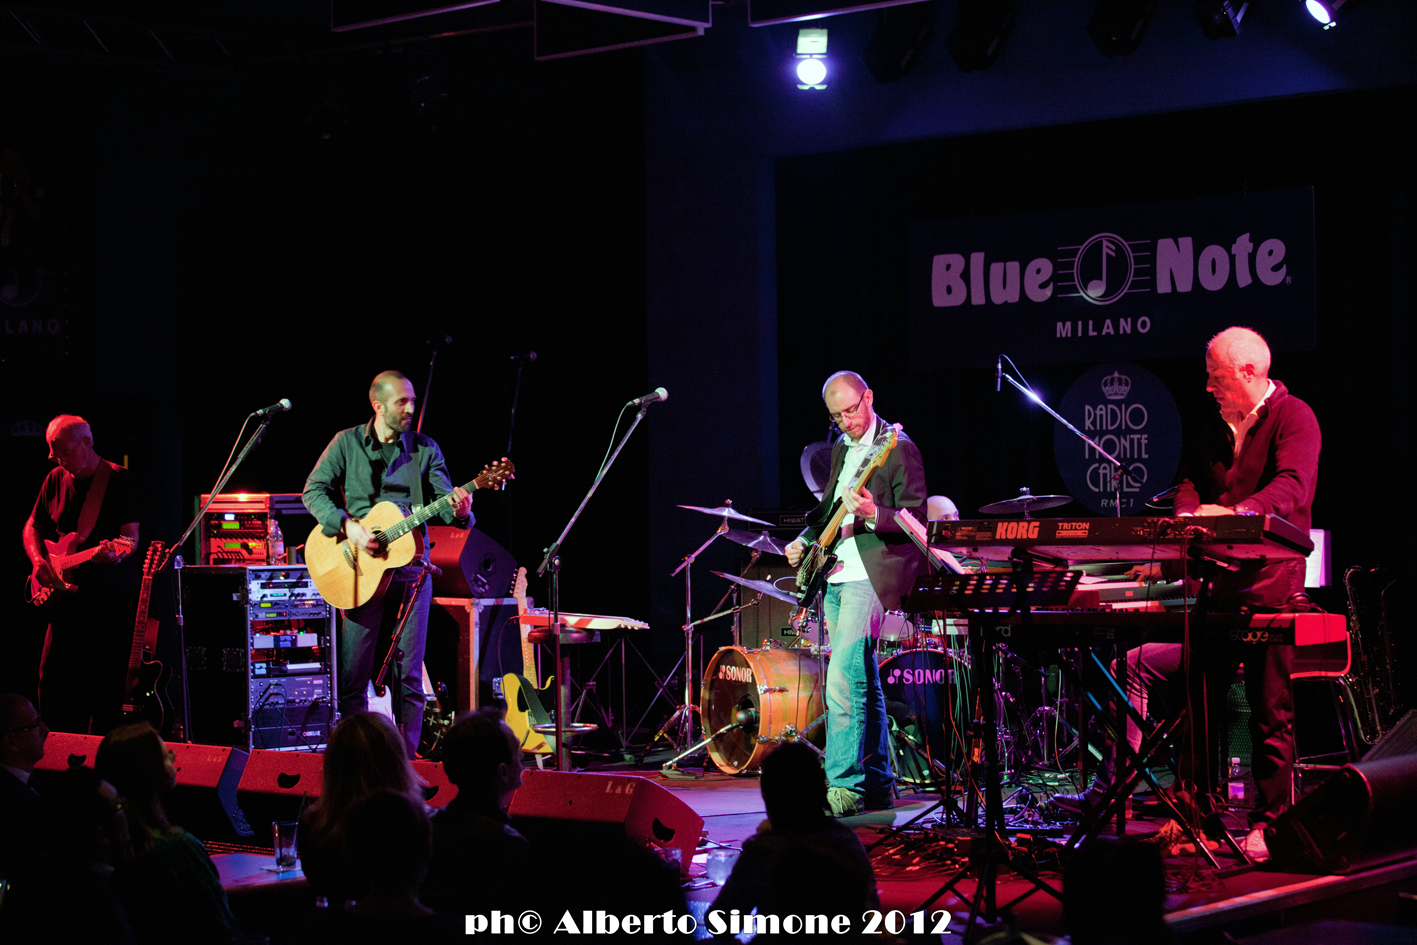 Big One – The European Pink Floyd Show (Part 1) 11/09/2013 21.01